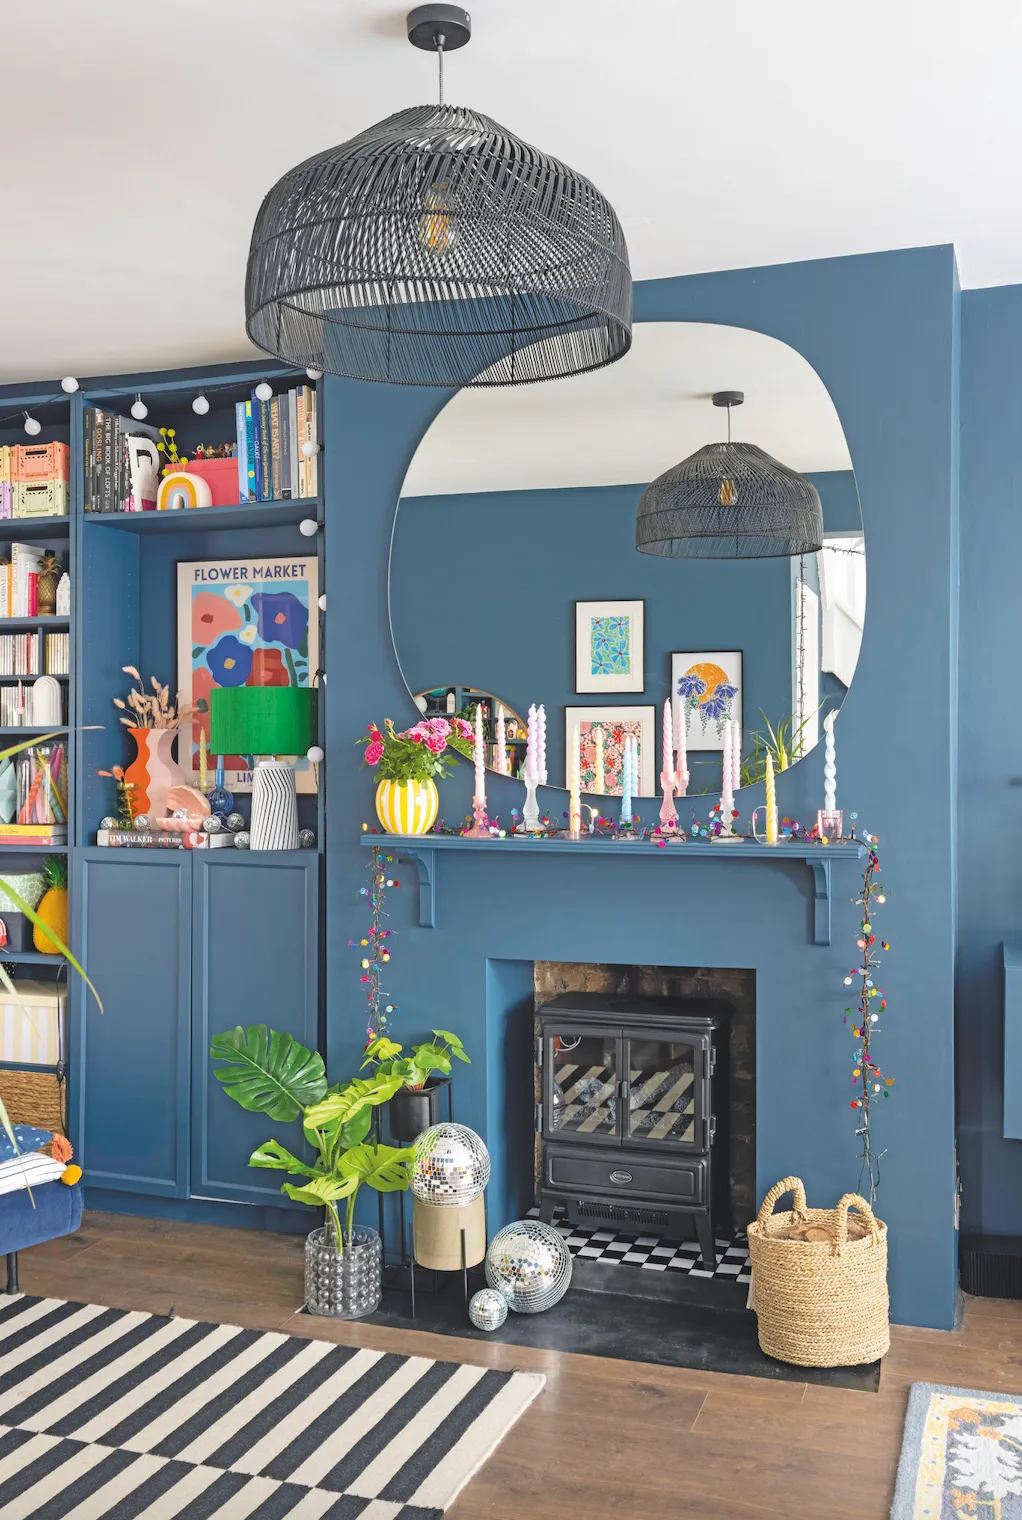 ‘I wanted a neat, streamlined fire surround, so I bought a cheap bookshelf, attached it with budget wooden brackets, and then painted it the same colour as the wall for a modern look’